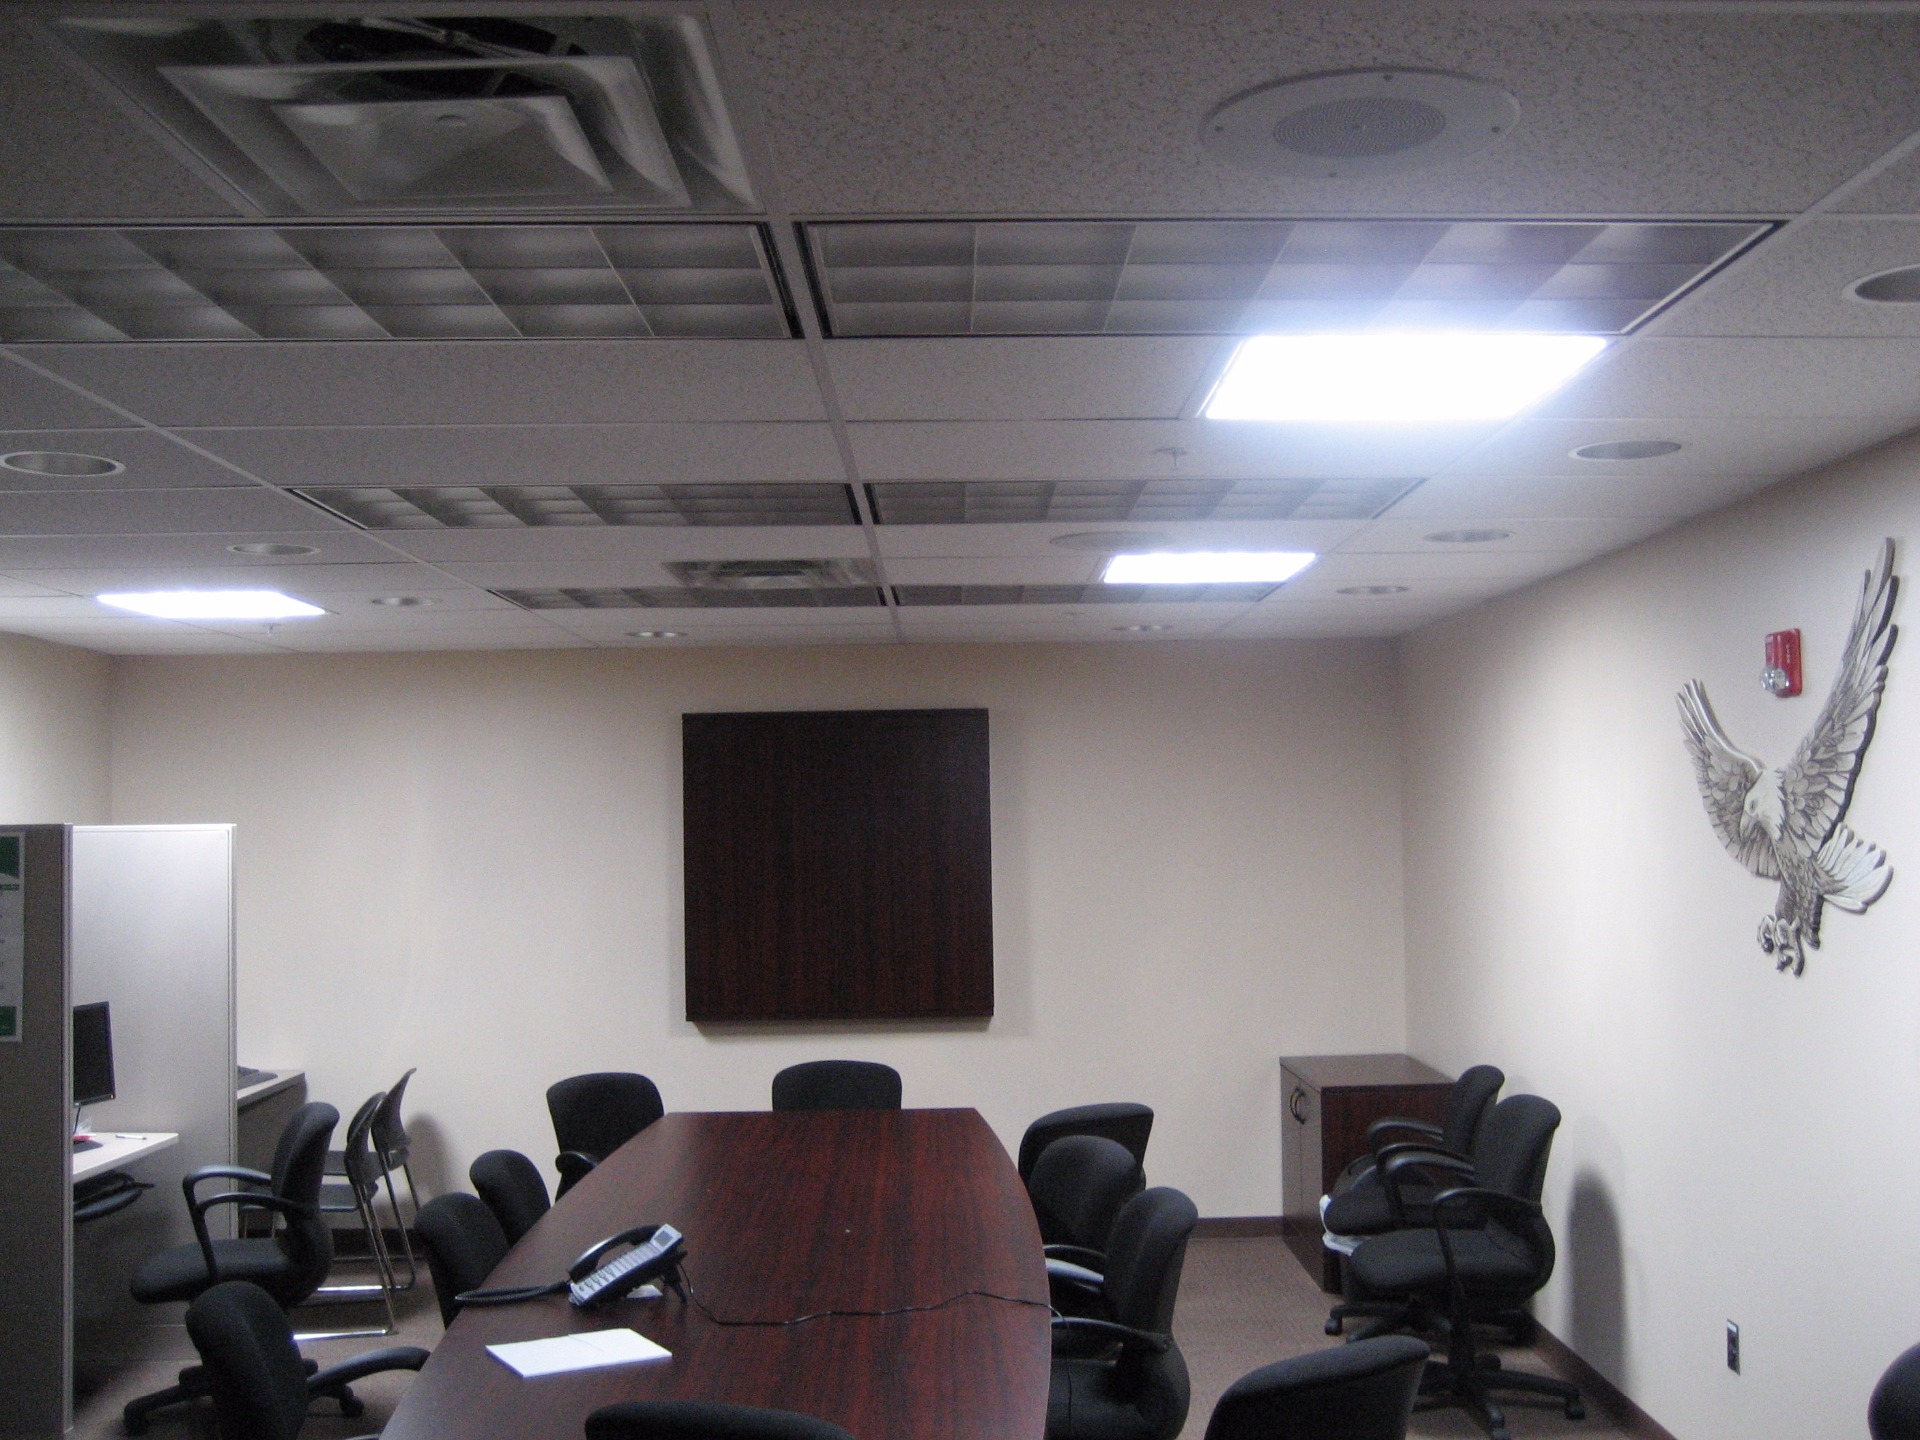 Giant Eagle conference room brightened by installed daylighting systems